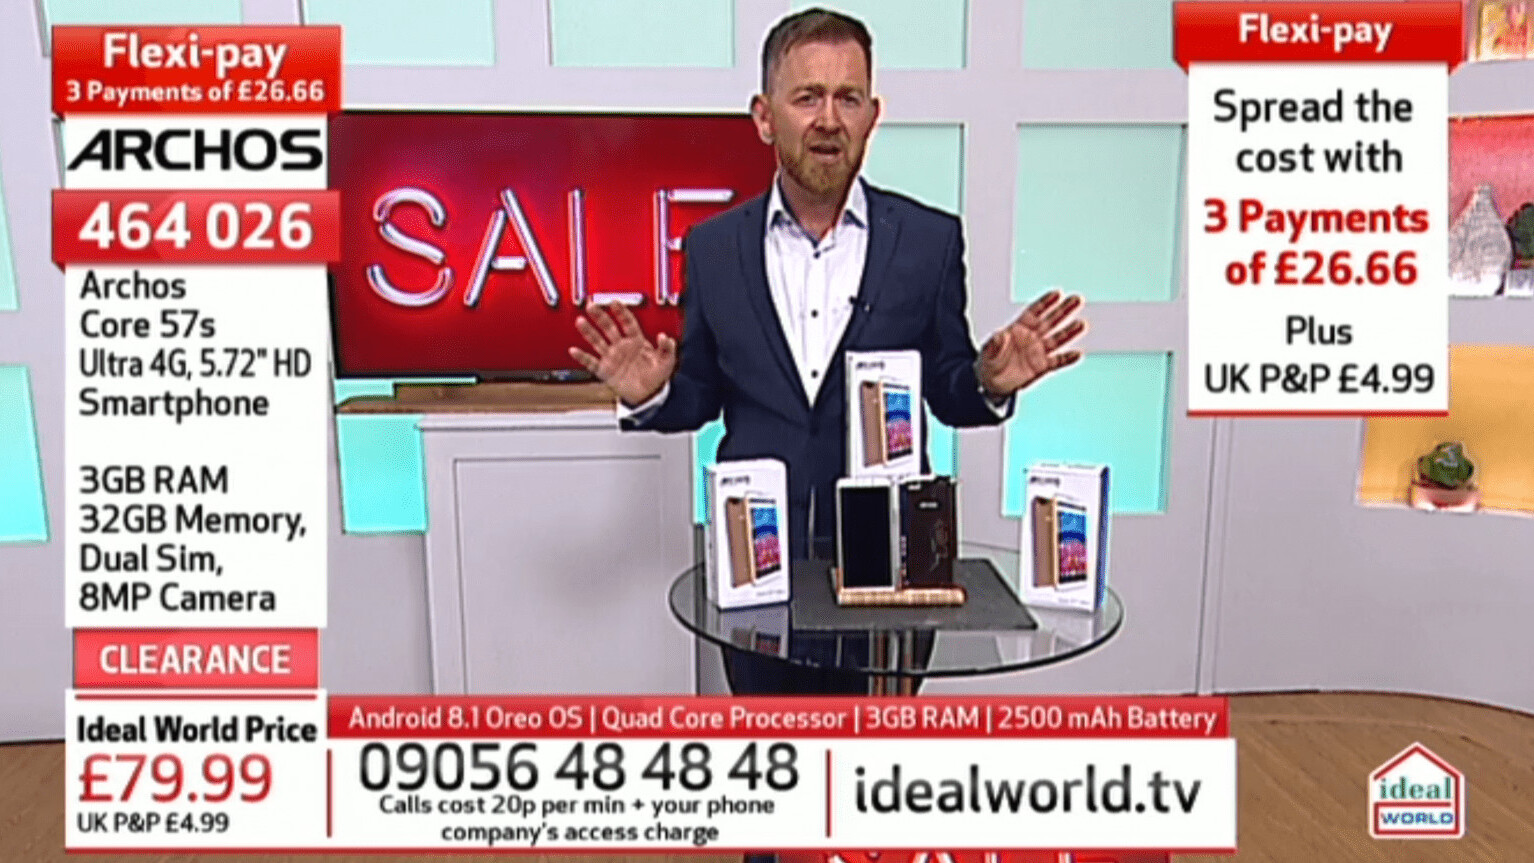 Teleshopping channels are selling smartphones with misleading, high-pressure tactics